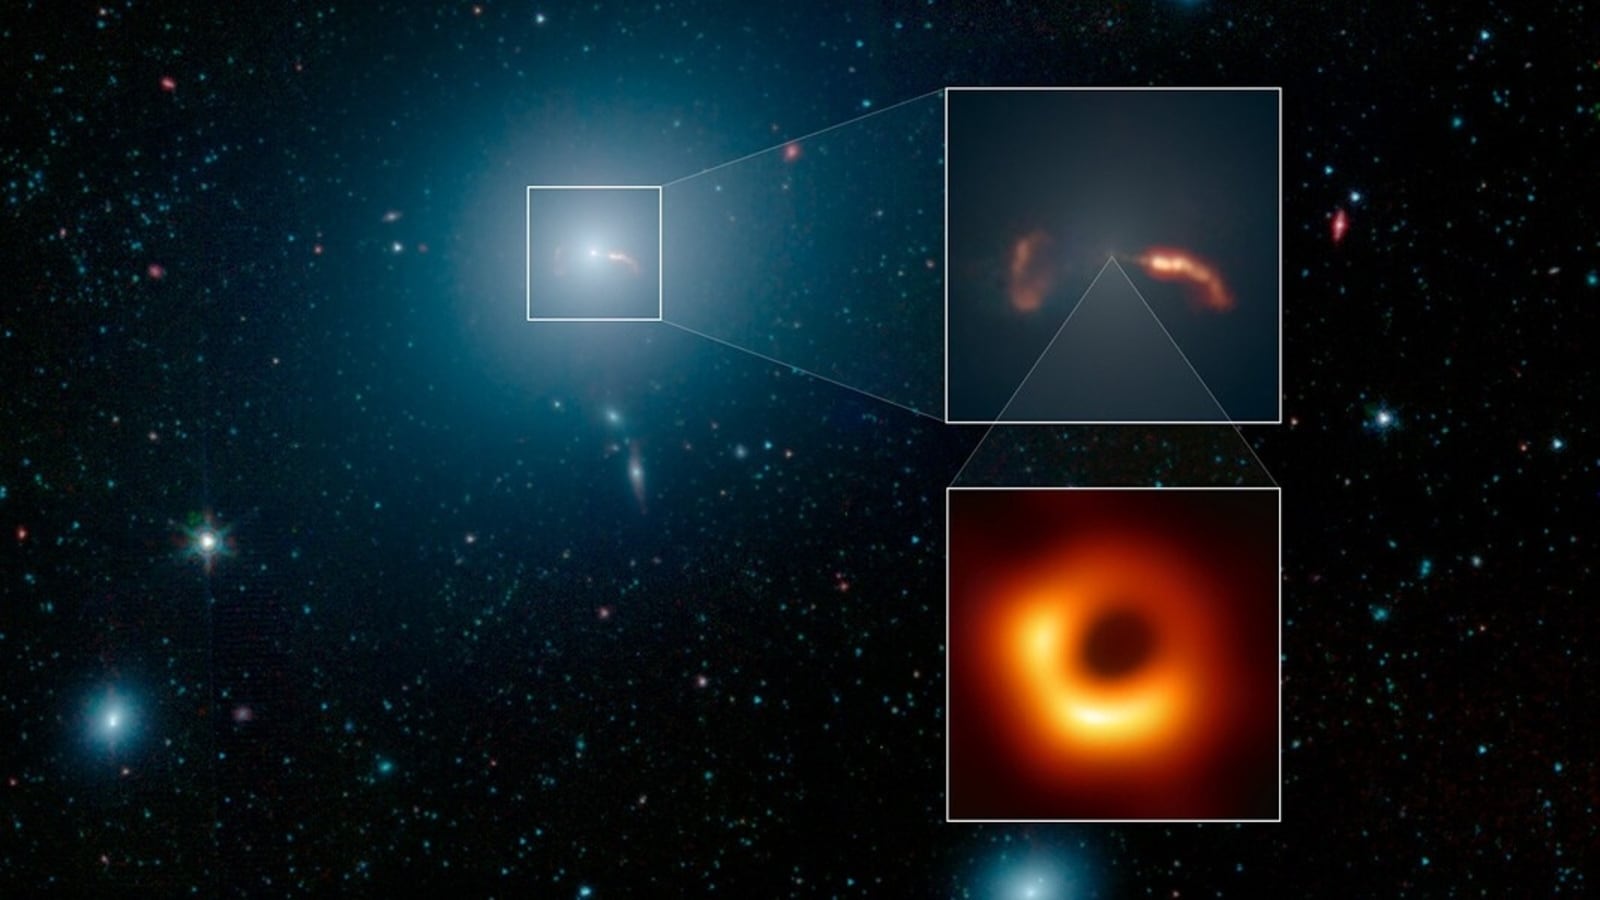 nasa-astronomy-picture-of-the-day-4-may-2023-supermassive-black-hole-in-messier-87-galaxy